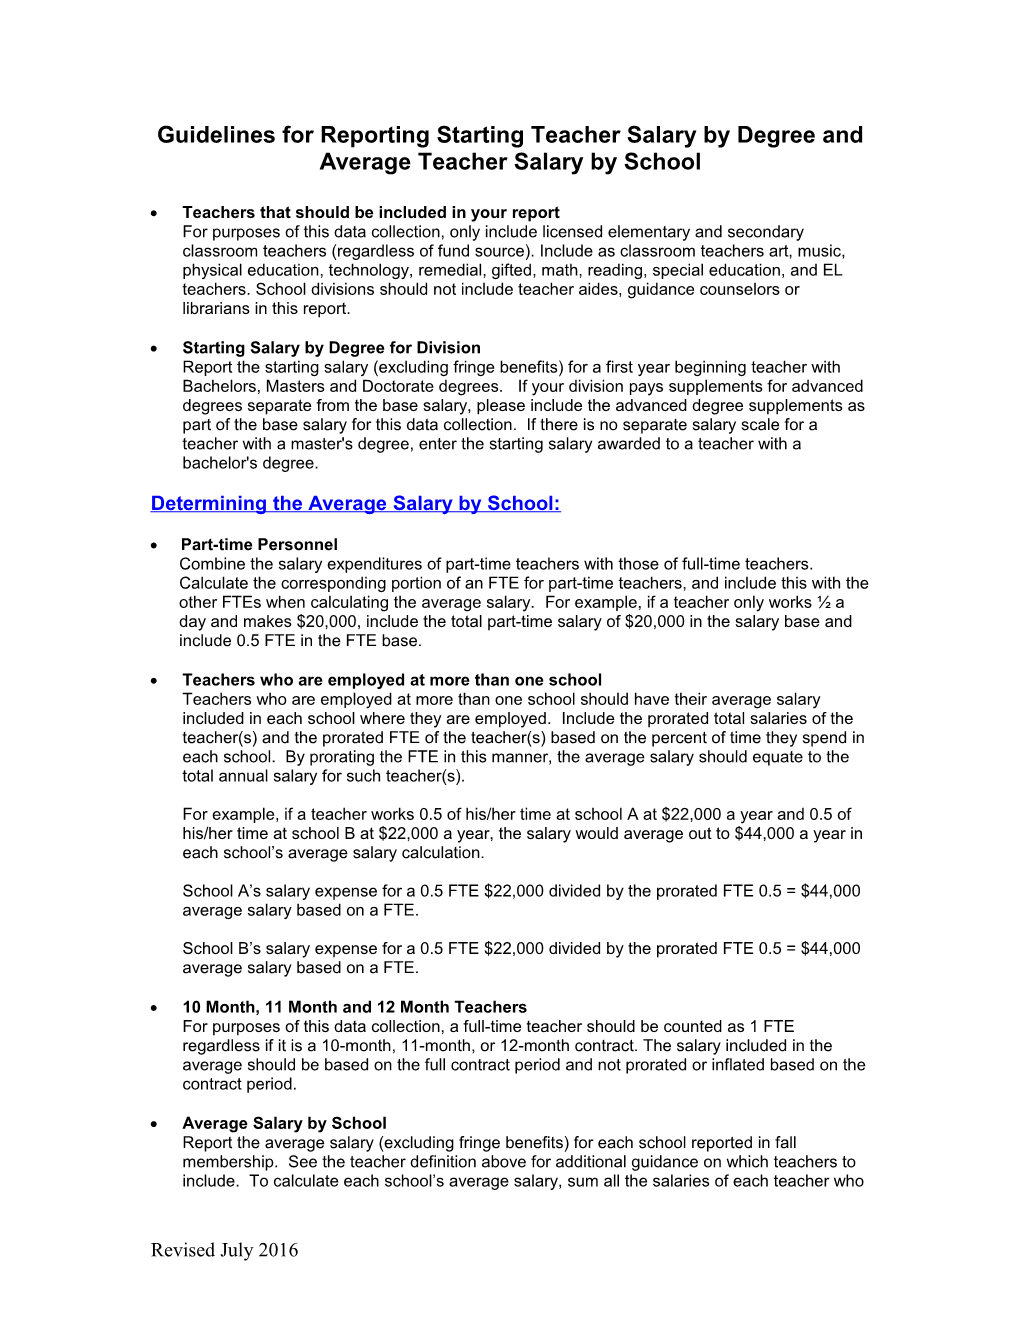 Guidelines for Reporting Starting Teacher Salary by Degree and Average Teacher Salary by School